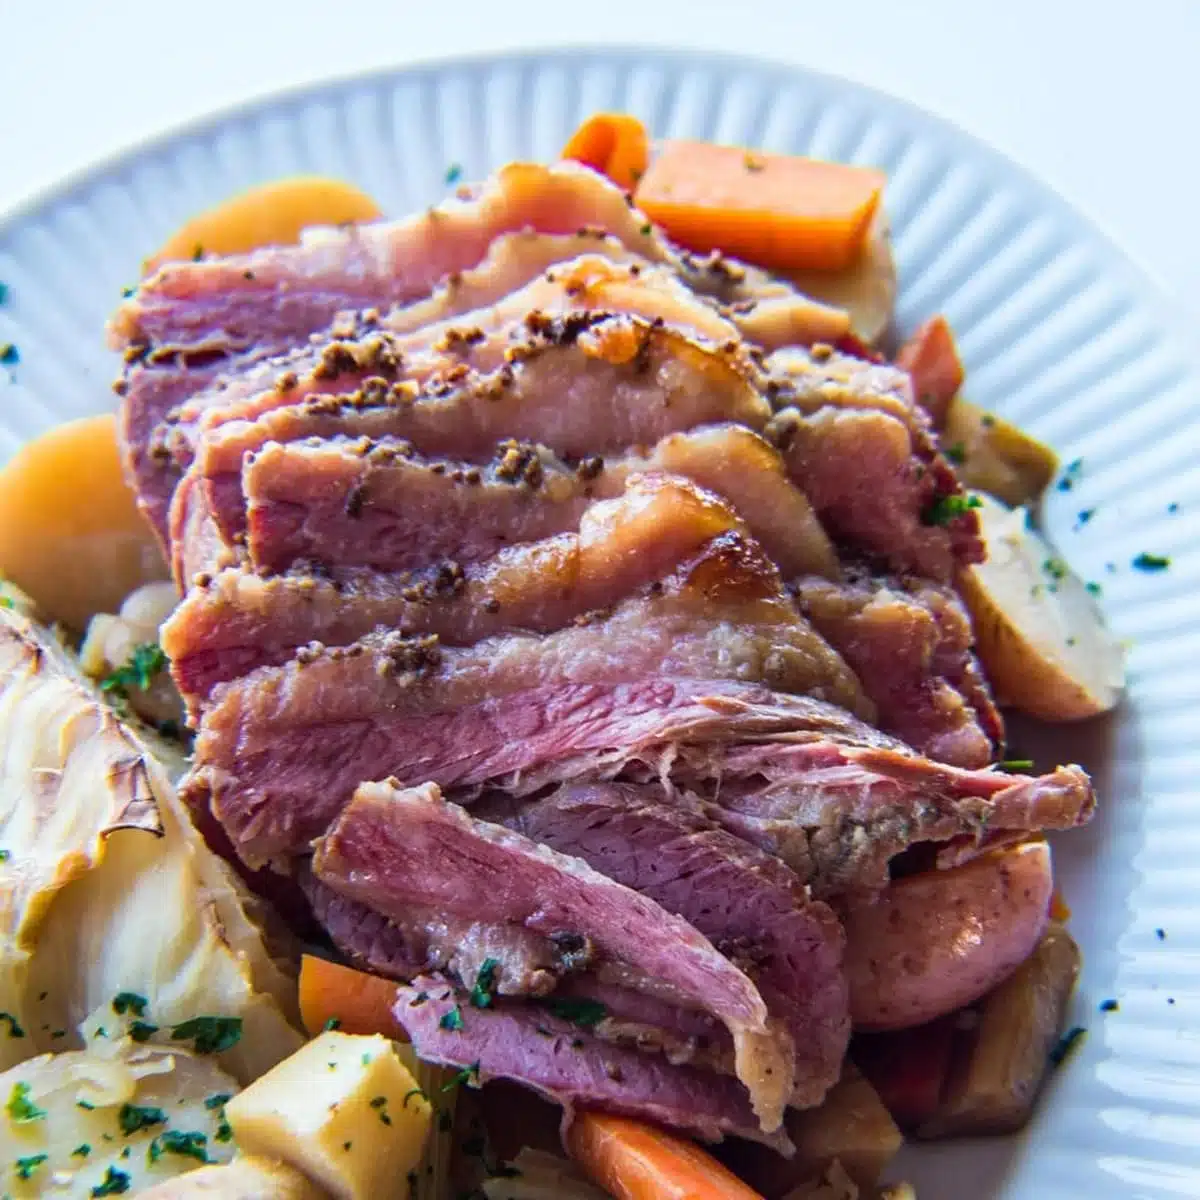 Square image of corned beef on a plate.